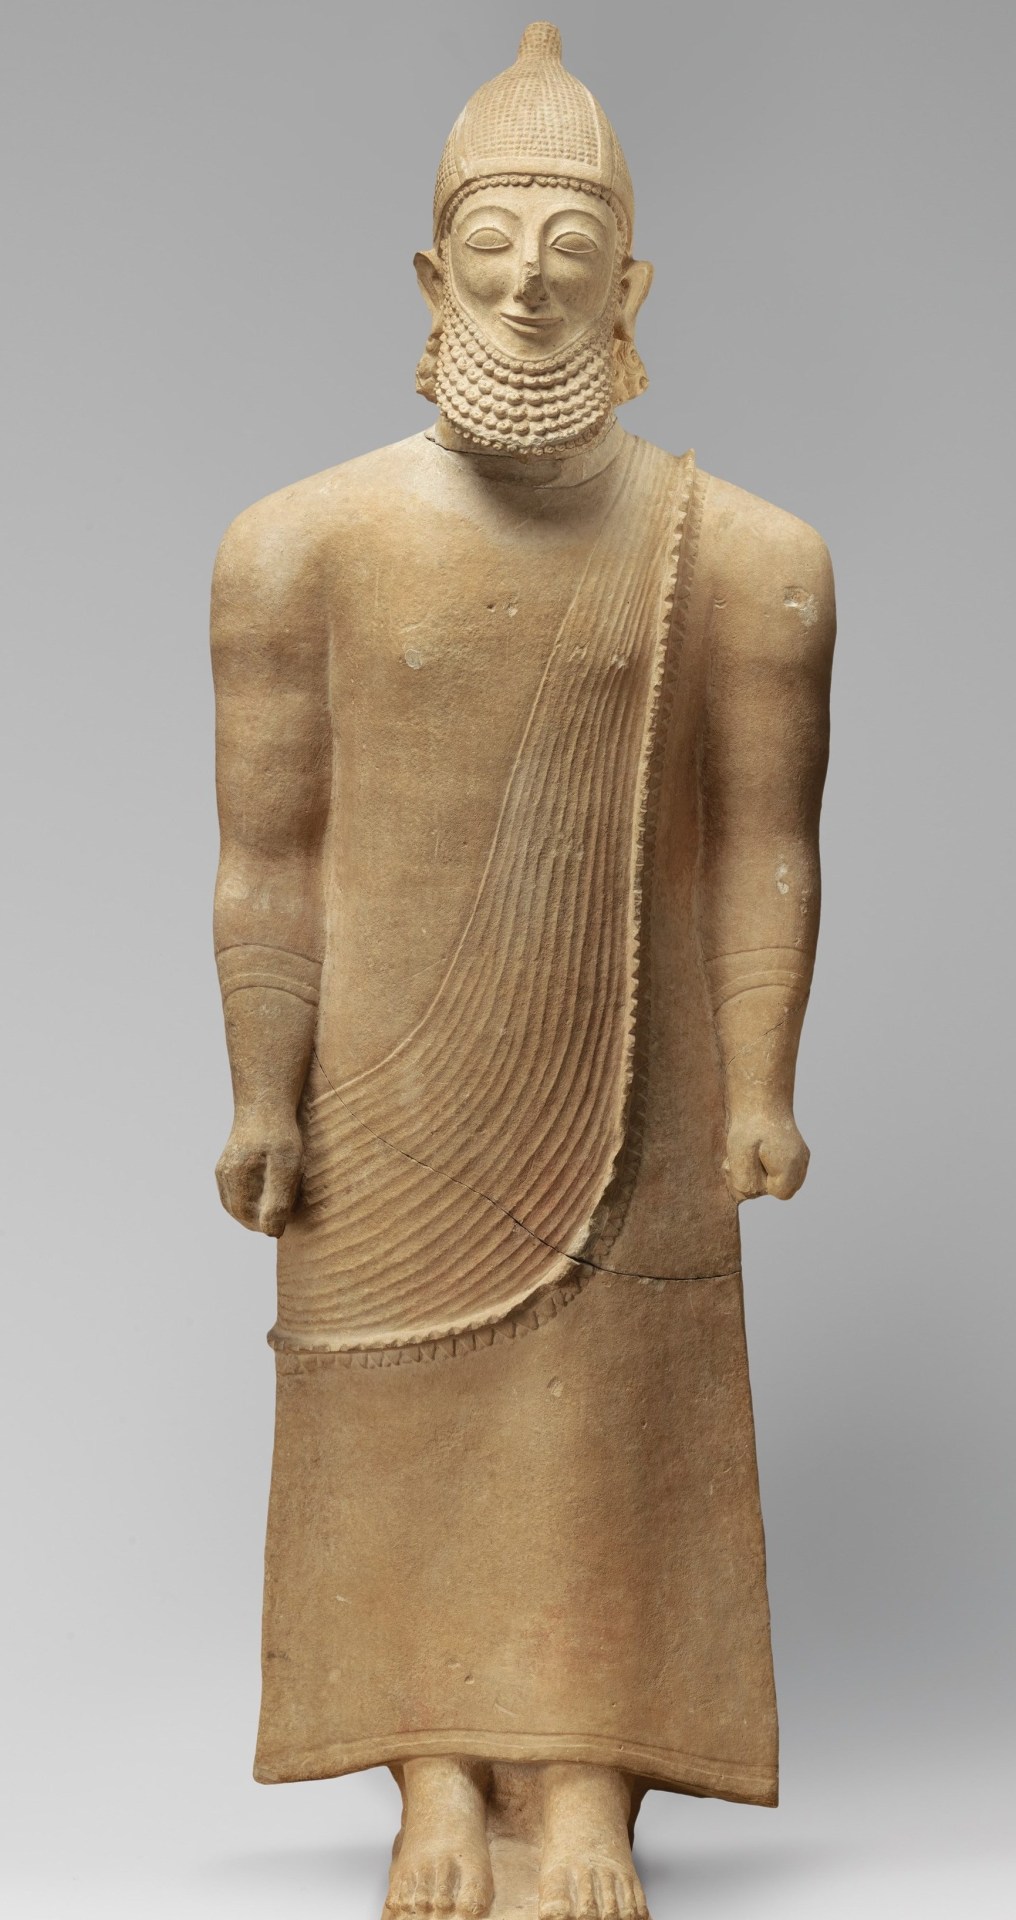 Cypriot guy, 6th century BCE